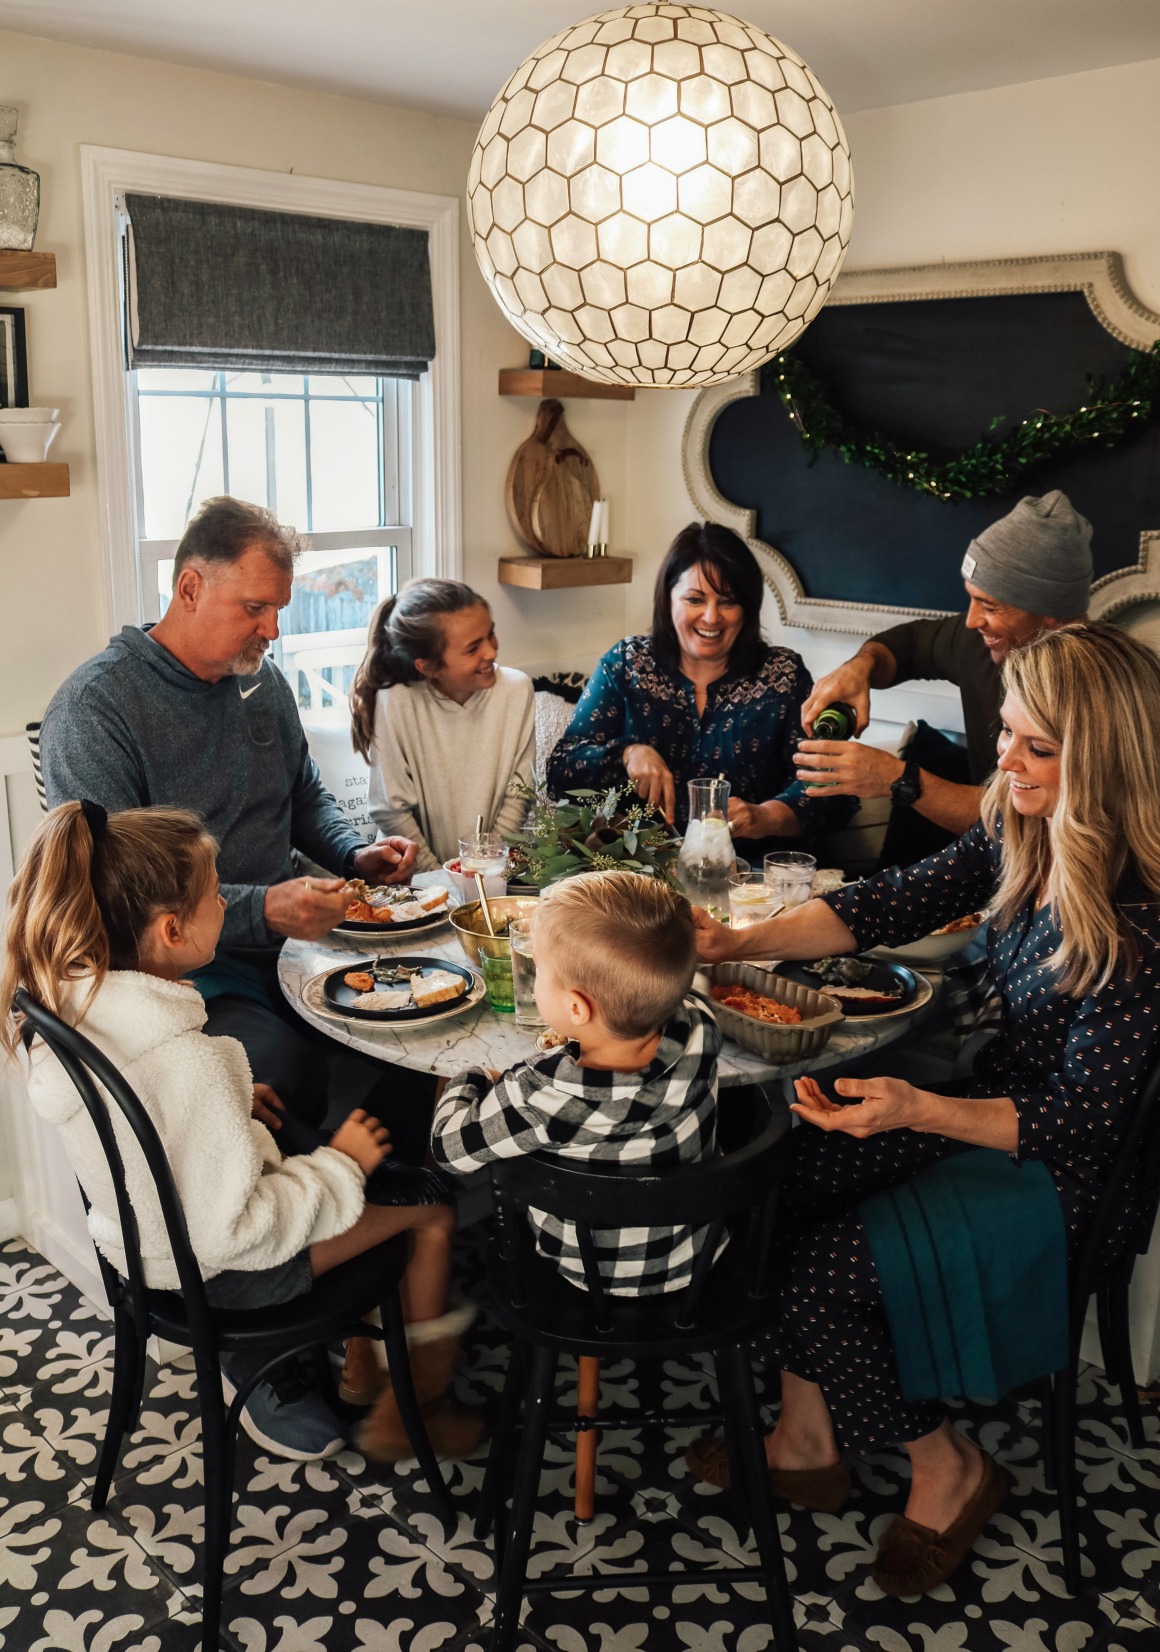 Thanksgiving in a Small Space